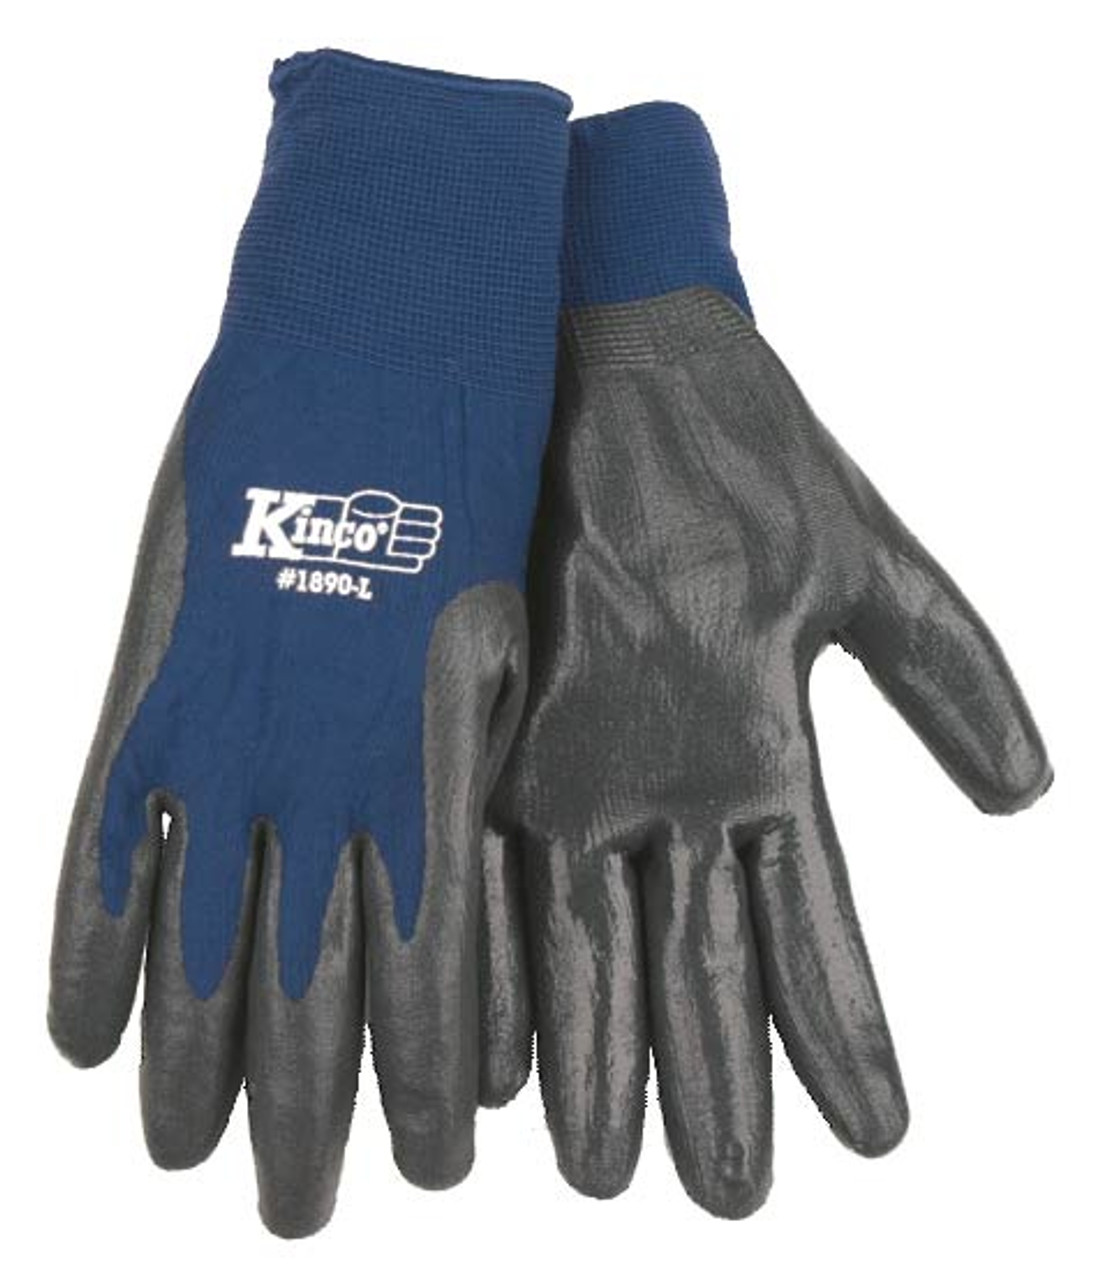 Kinco 1890 - Nitrile Gripping Form Fitting Work Gloves